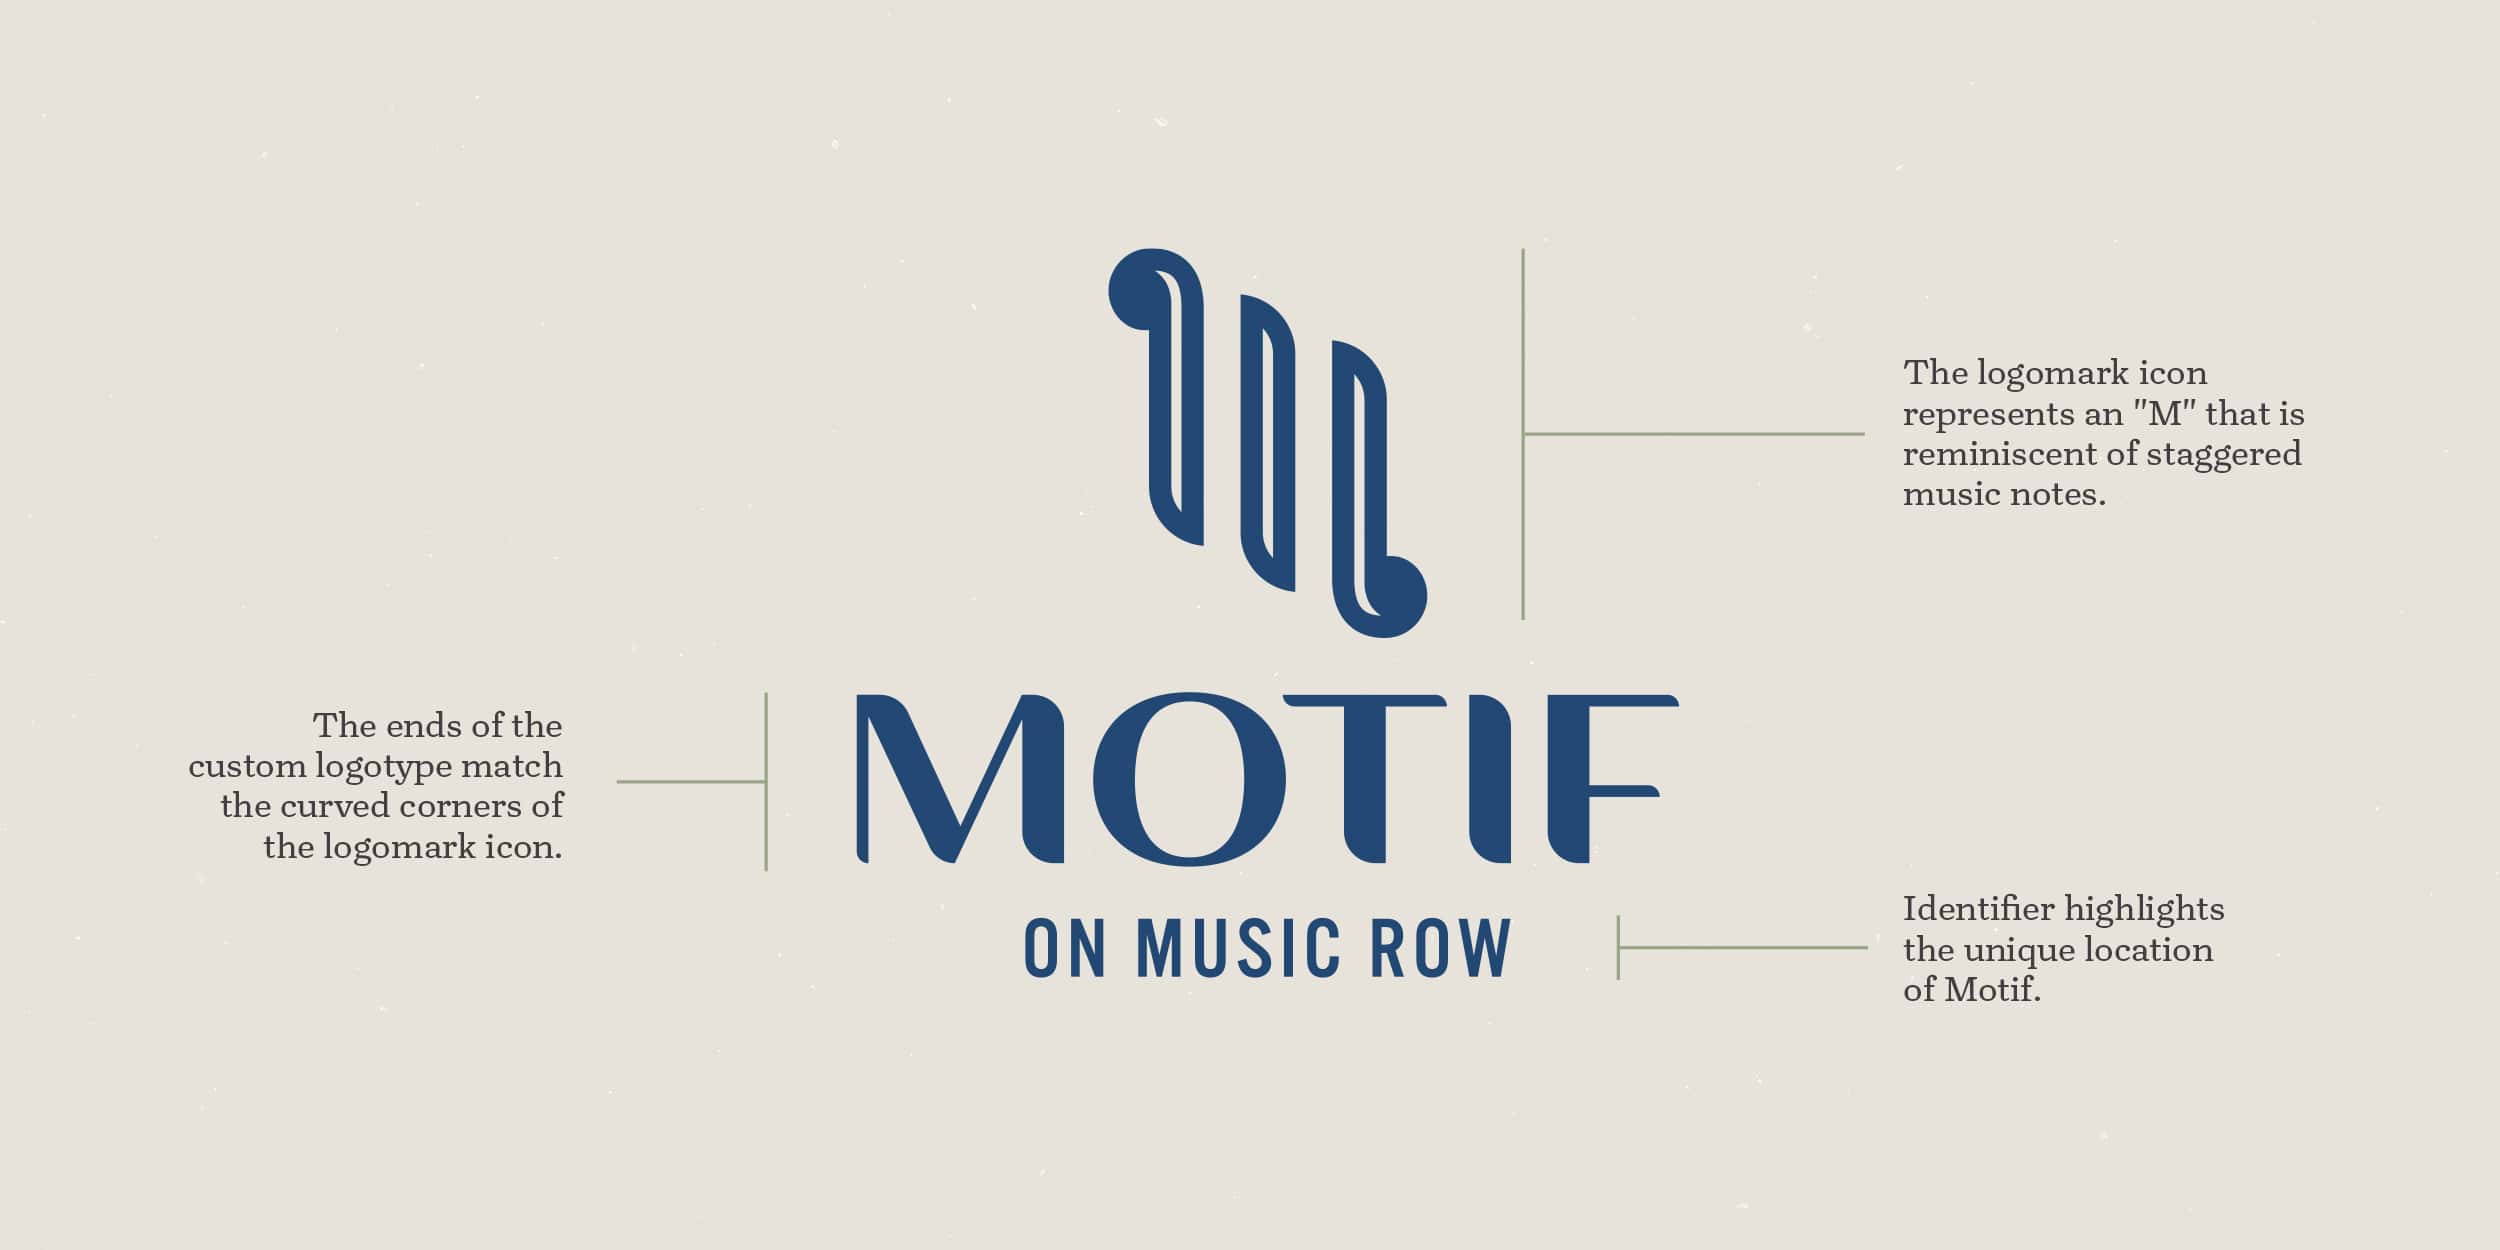 Logo anatomy diagram of the Motif on Music Row logo which explains that the ends of the custom logotype match the curved corners of the logomark icon, Identifier highlights the location and the logomark icon represents an 